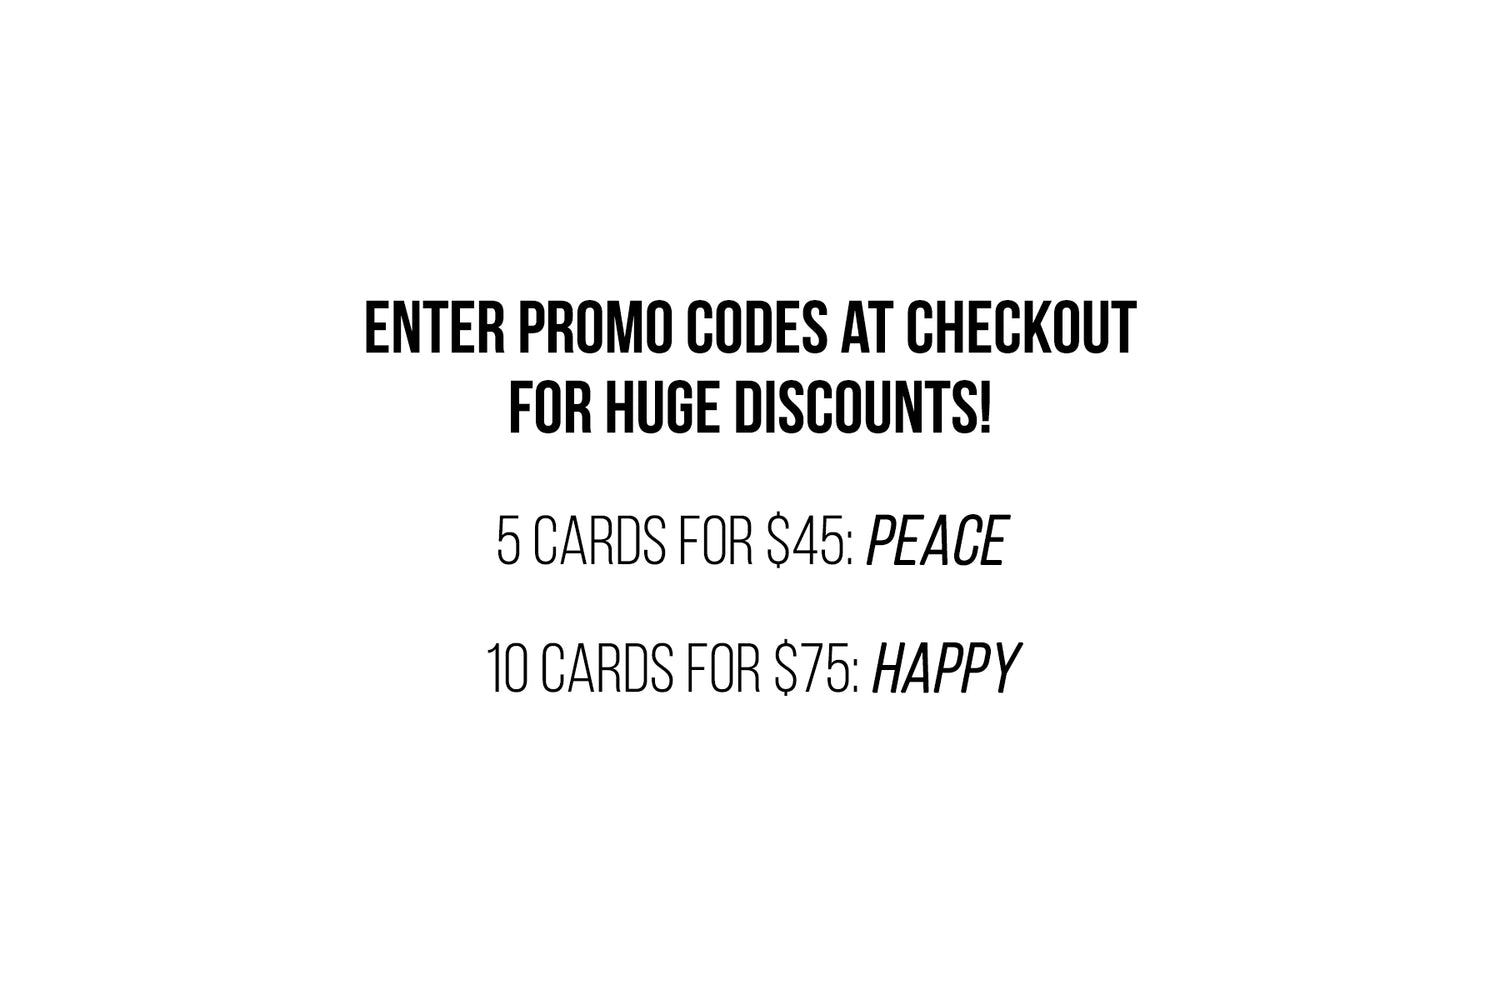 Mental Health Cards promo code for cart.